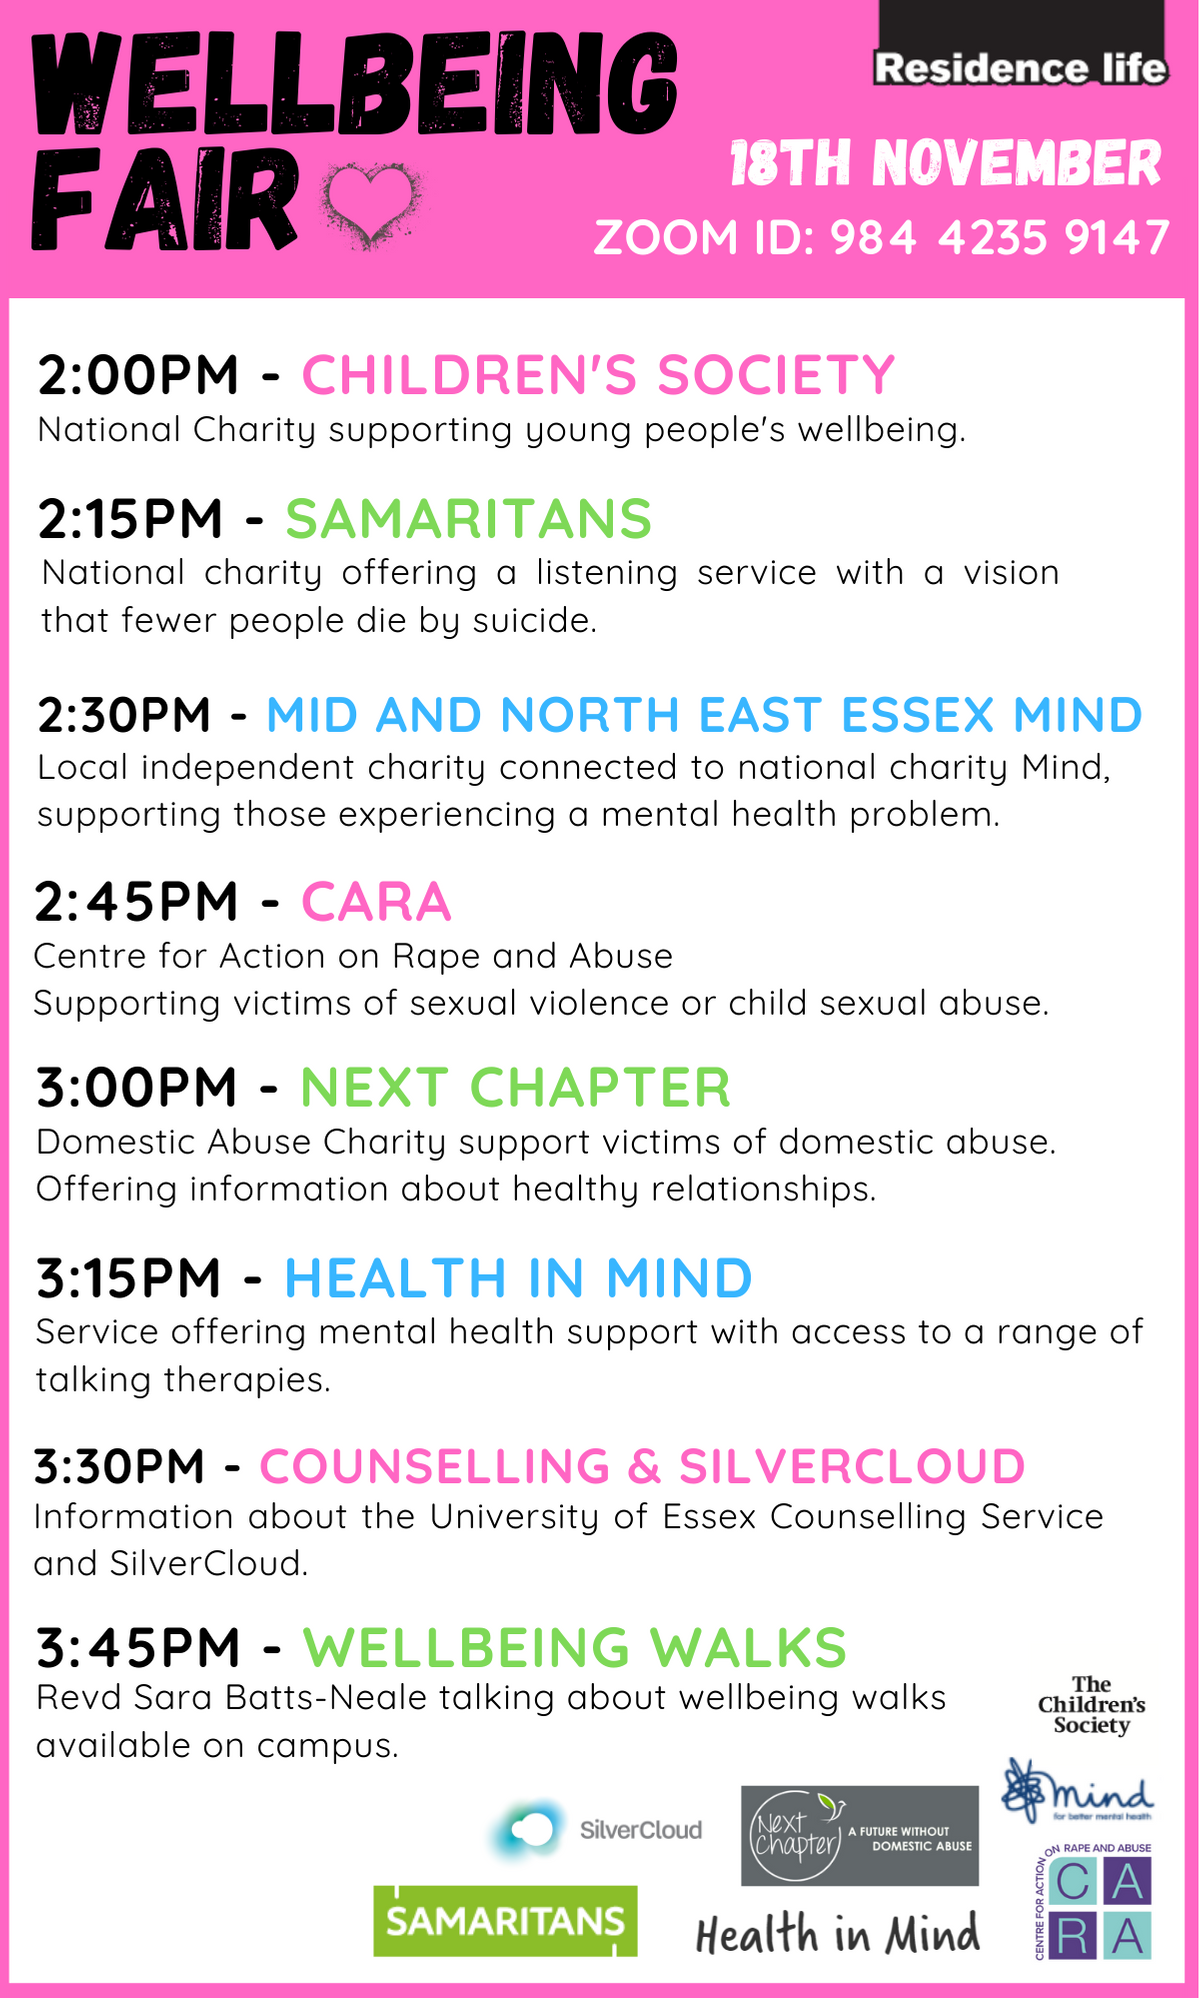 14:00 - Children's Society National Charity supporting young people's wellbeing.  14:15 – Samaritans National charity offering a listening service with a vision that fewer people die by suicide.  14:30 - Mid and North East Essex Mind Local independent charity connected to national charity Mind, supporting those experiencing a mental health problem.  14:45 – CARA Centre for Action on Rape and Abuse supporting victims of sexual violence or child sexual abuse.  15:00 - Next Chapter Domestic Abuse Charity support victims of domestic abuse and offering information about healthy relationships.  15:15 - Health in Mind Service offering mental health support with access to a range of talking therapies.  15:30 - Counselling & SilverCloud Information about the University of Essex Counselling Service and SilverCloud online support tool.  15:45 - Wellbeing Walks Revd Sara Batts-Neale talking about wellbeing walks available on campus.